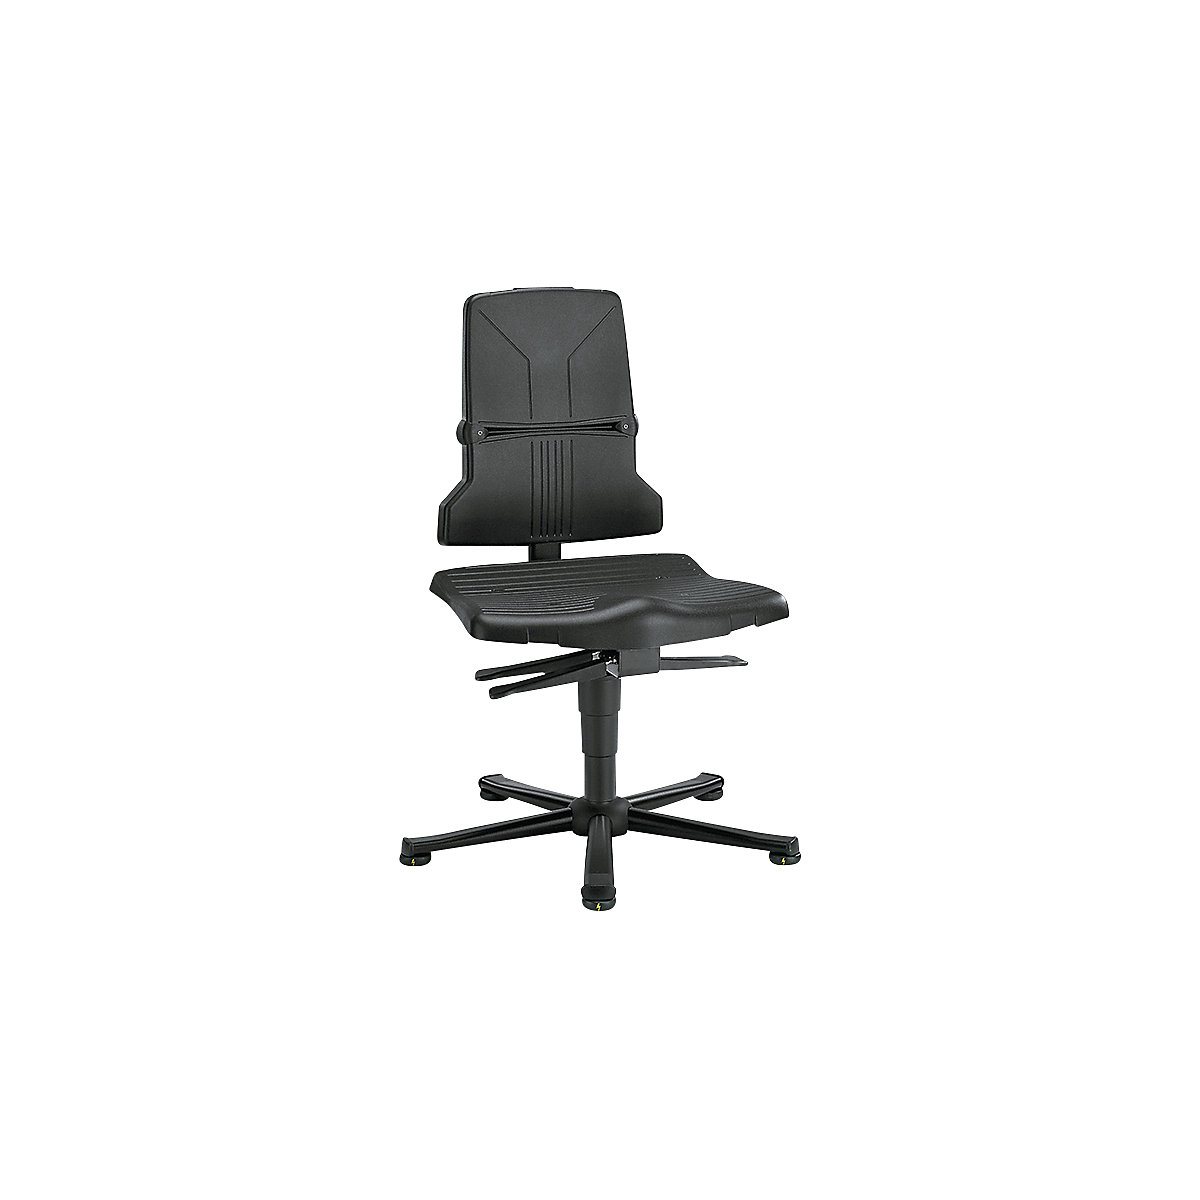 ESD SINTEC industrial swivel chair – bimos, with synchronous technology, with floor glides-3